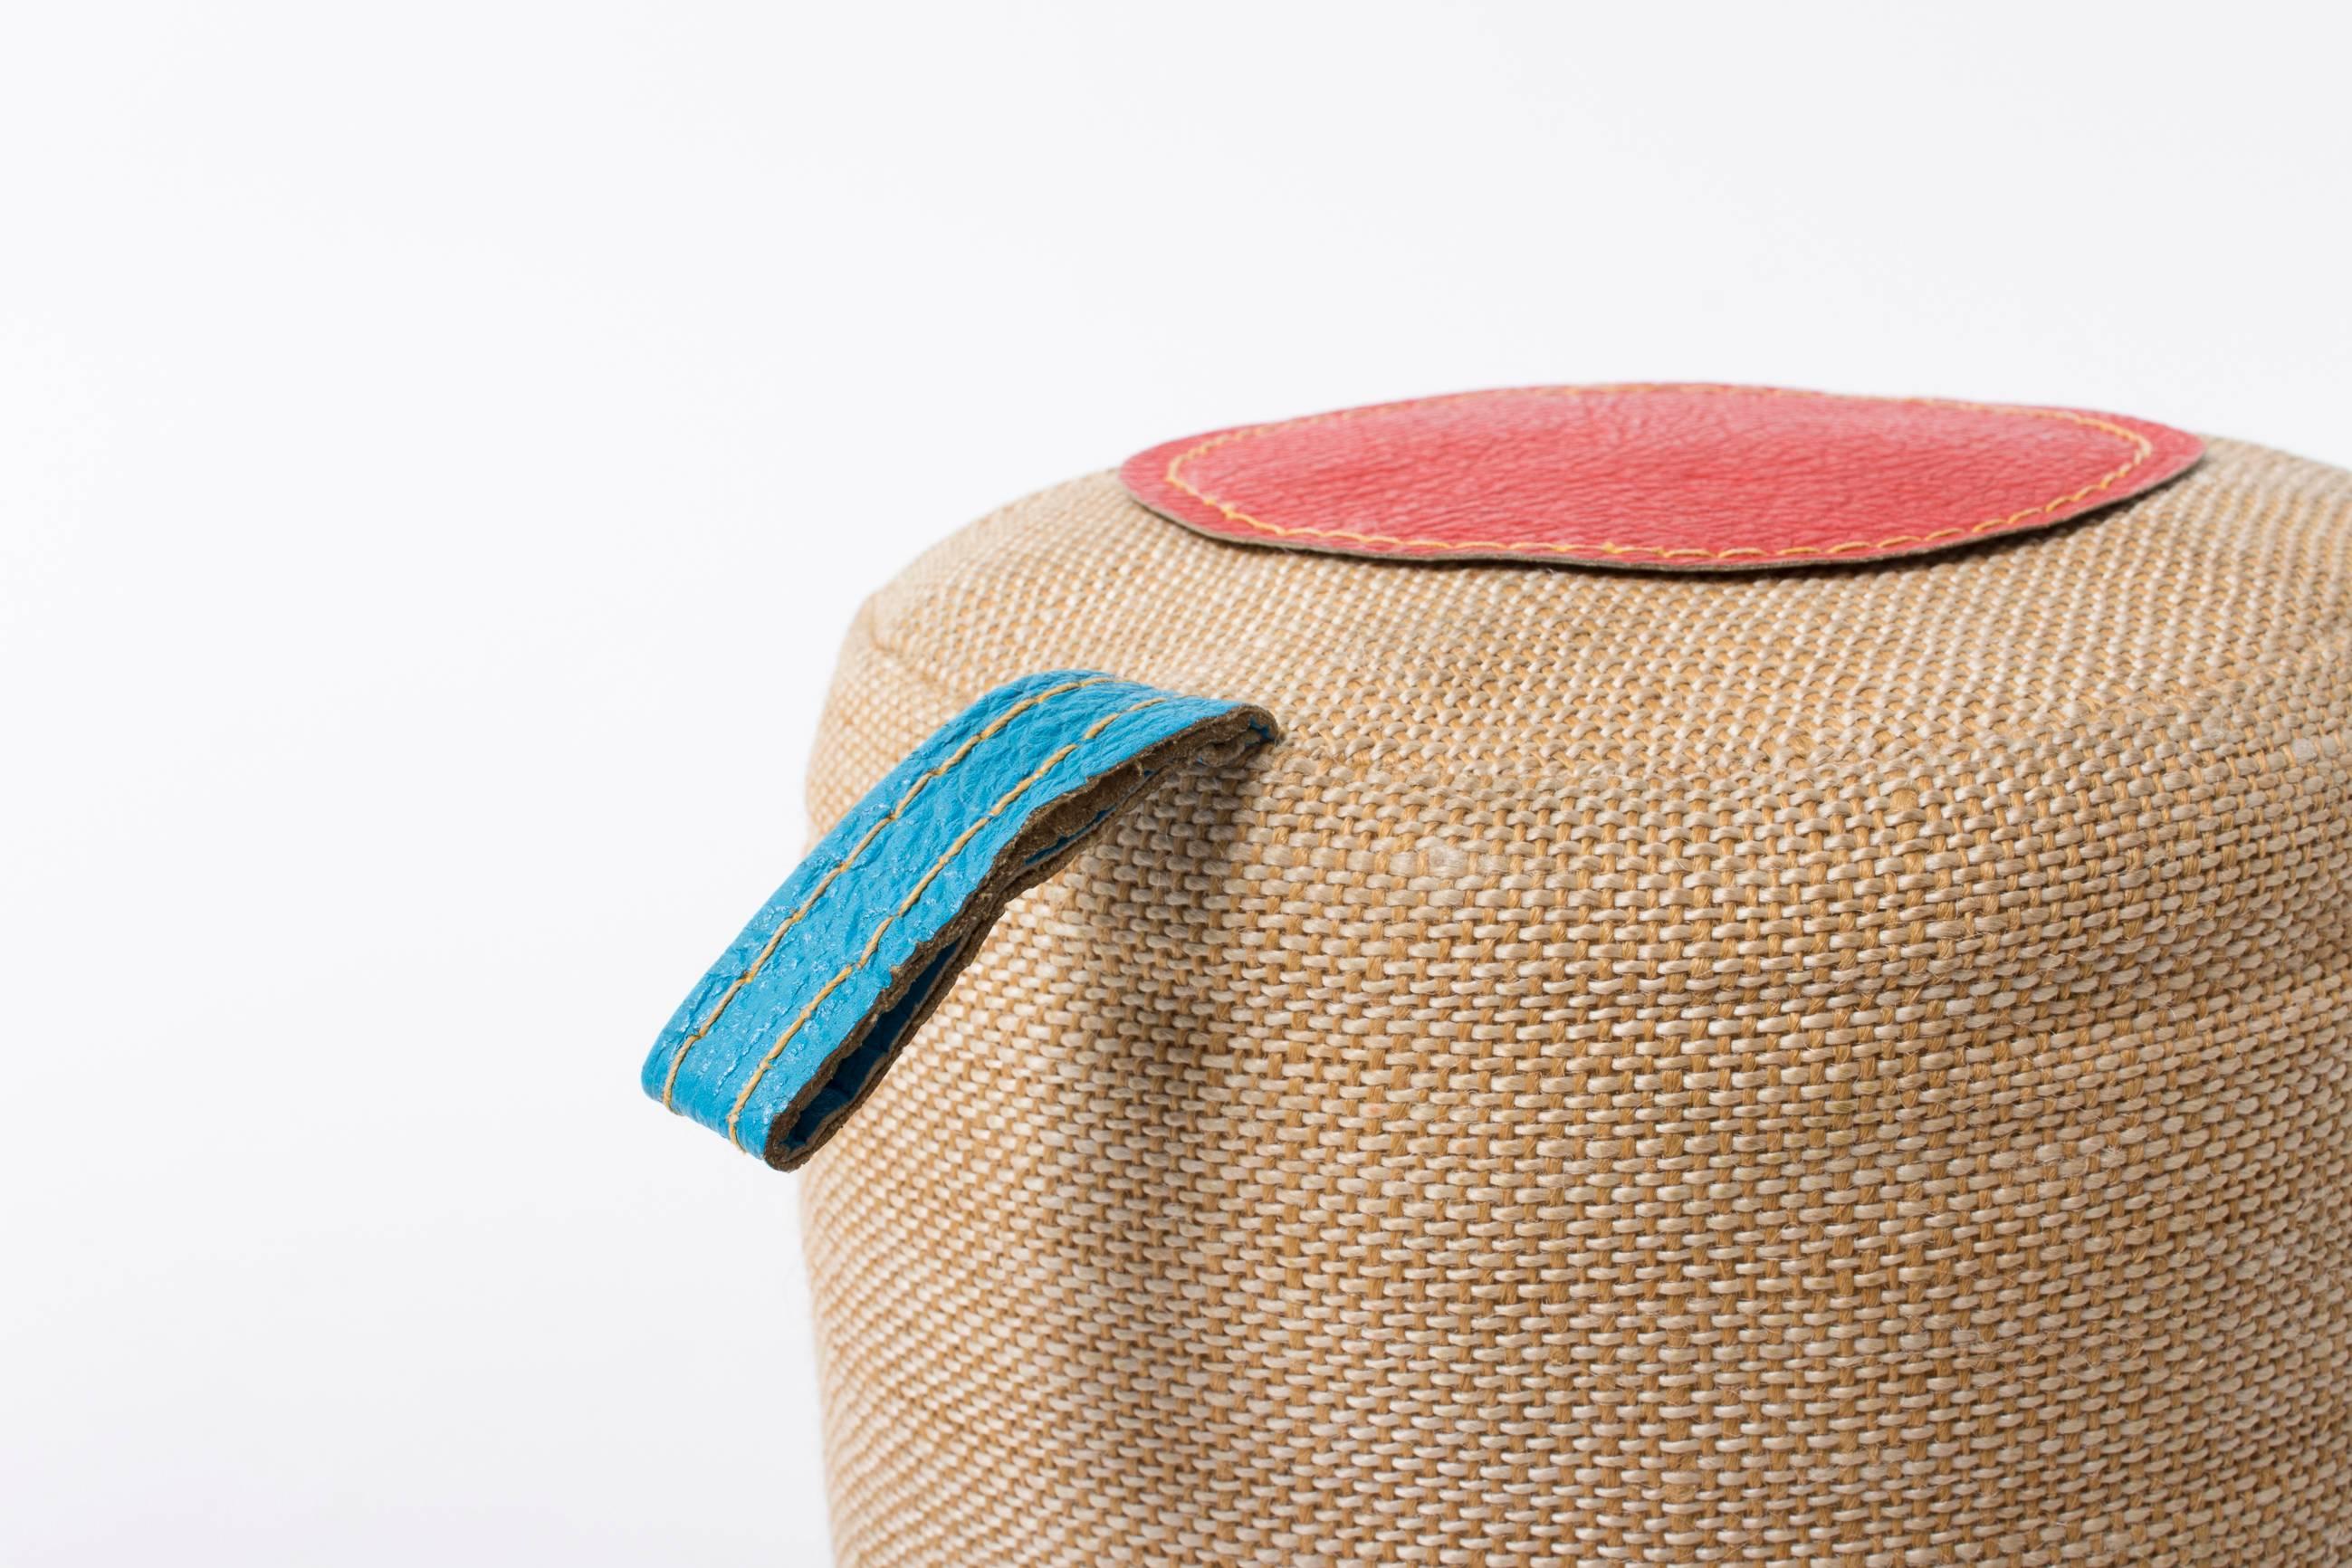 Mid-20th Century 'Therapeutic Toy' Cylindrical Seat Cushion by Renate Müller designed in 1968 For Sale